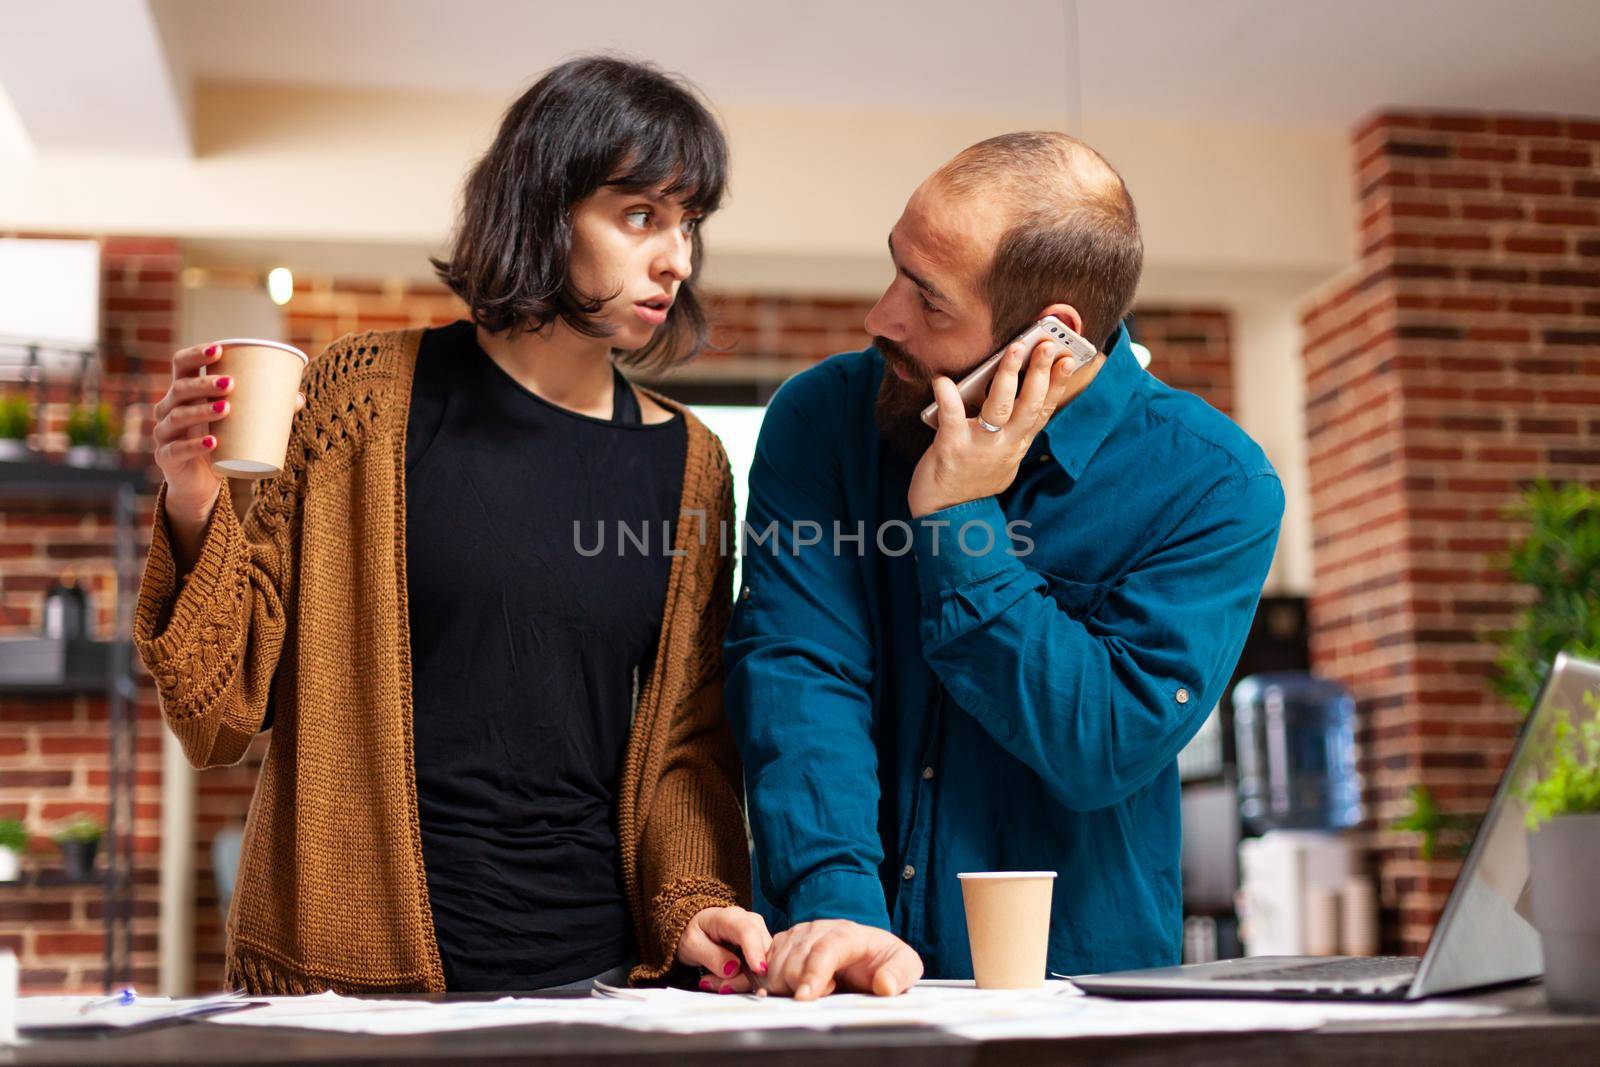 Manager talking at phone with businessman discussing marketing strategy while working at company presentation with entrepreneur woman in startup office. Businesspeople analyzing business document